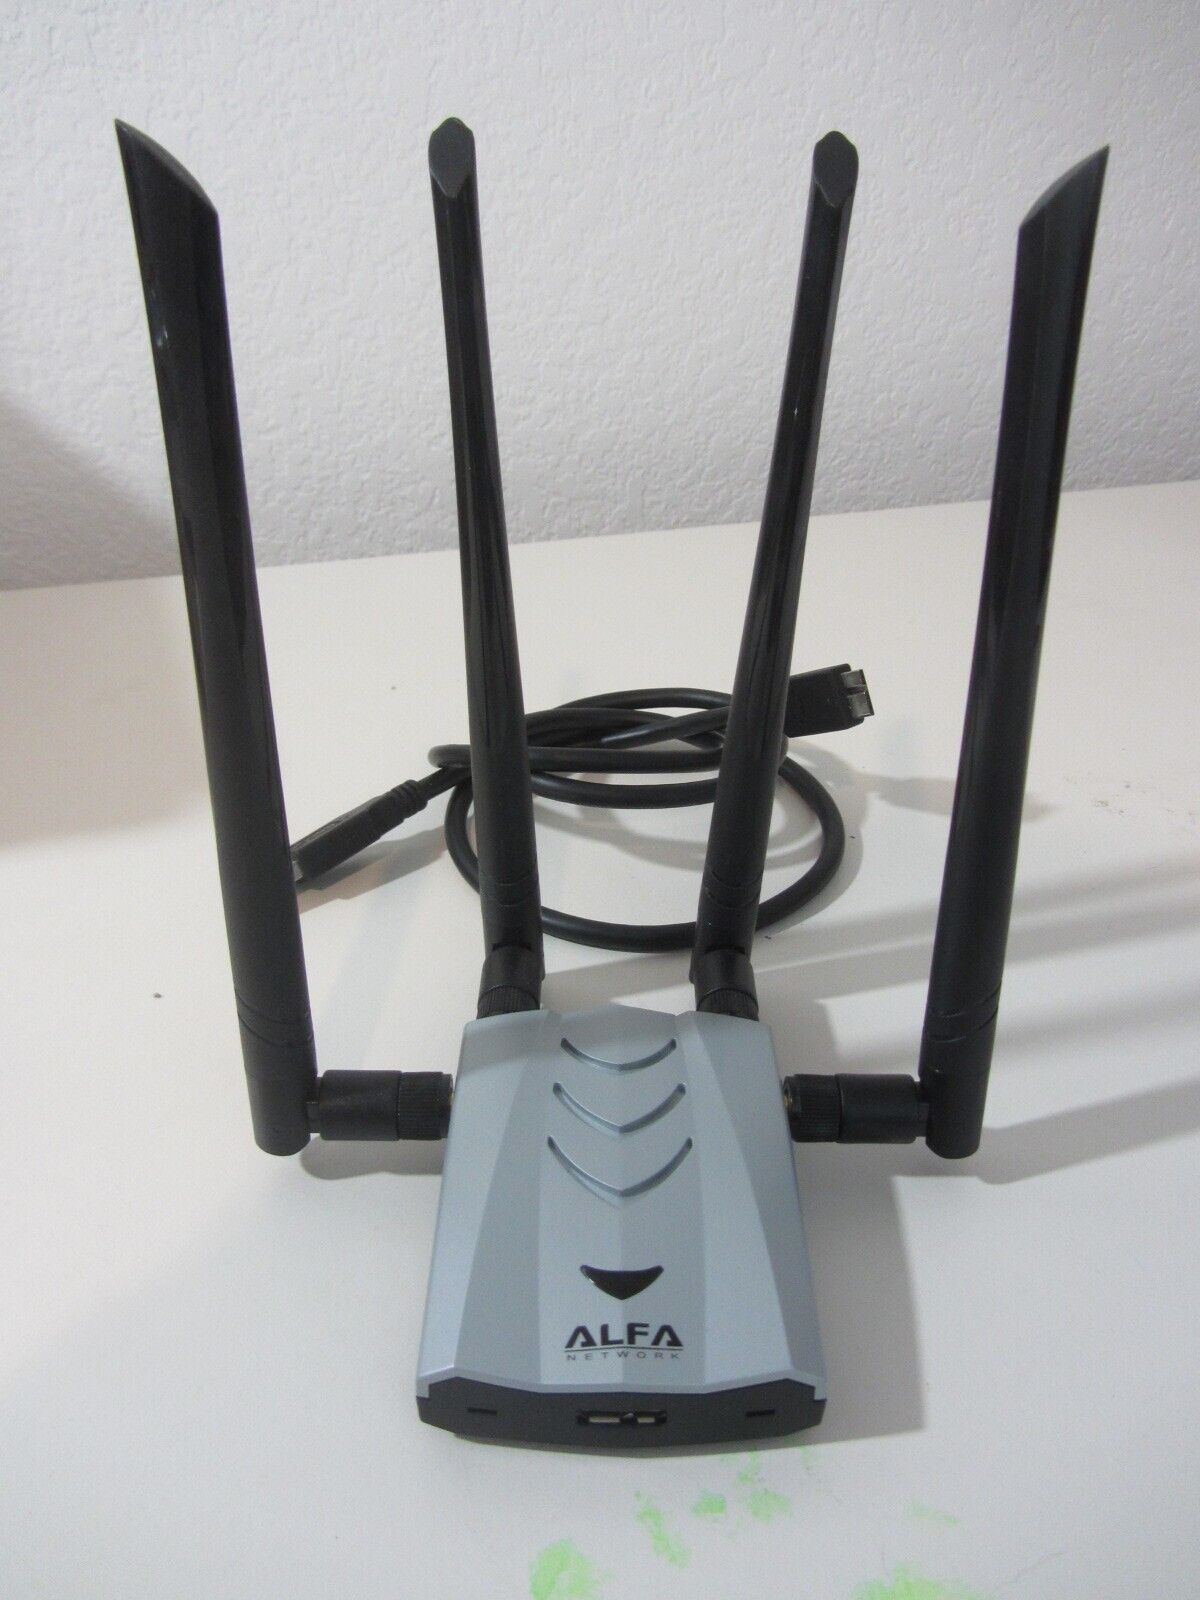 Alfa AWUS1900 802.11ac 1900Mbps Dual Band 2.4/5Ghz Wi-Fi USB Adapter AC1900